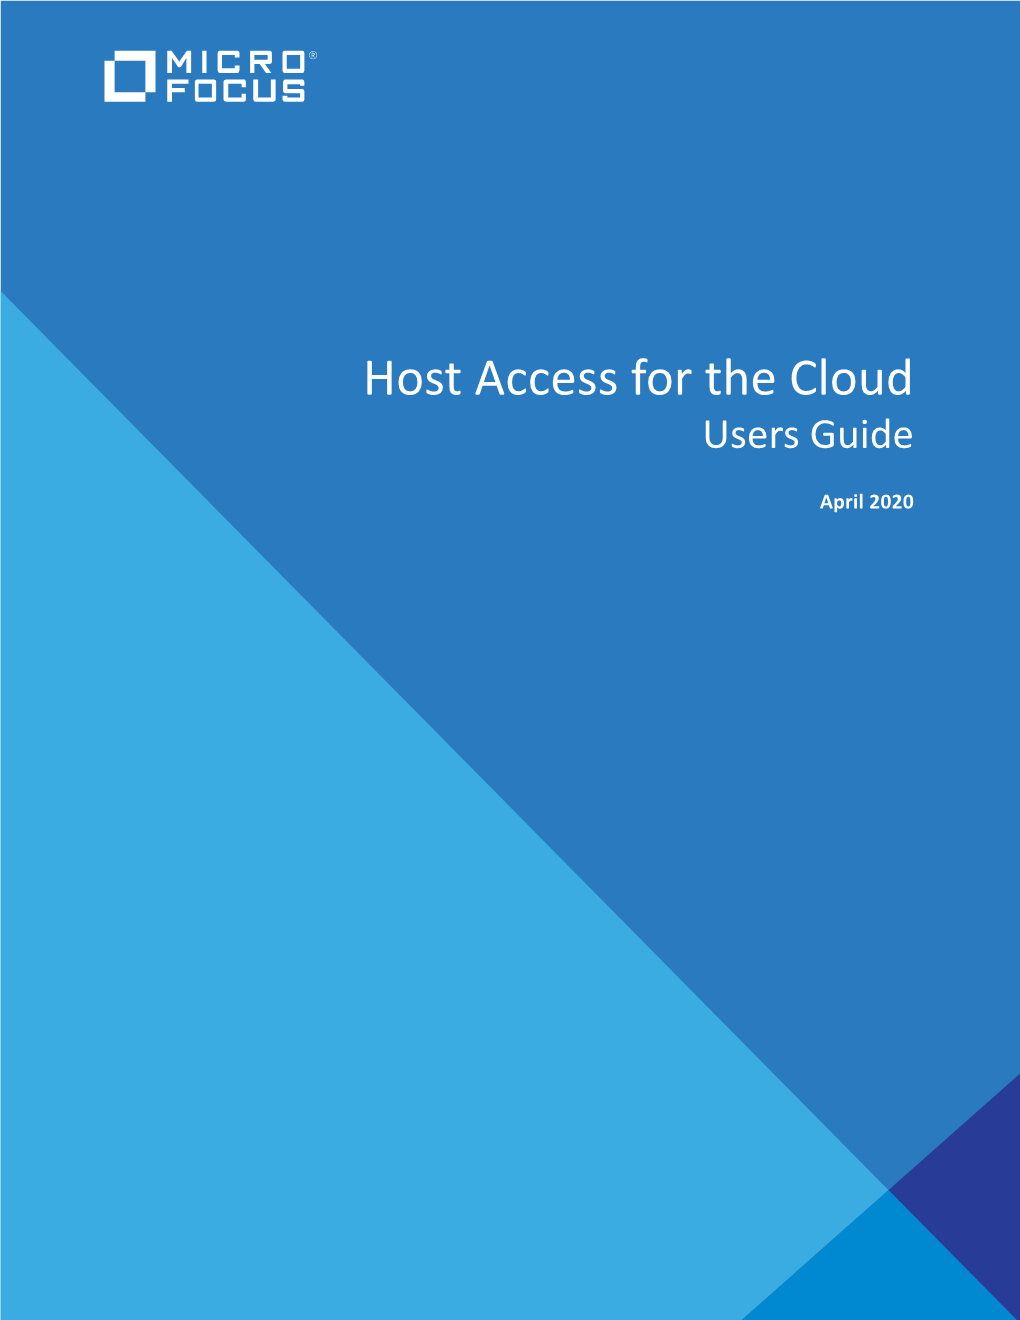 Host Access for the Cloud Users Guide